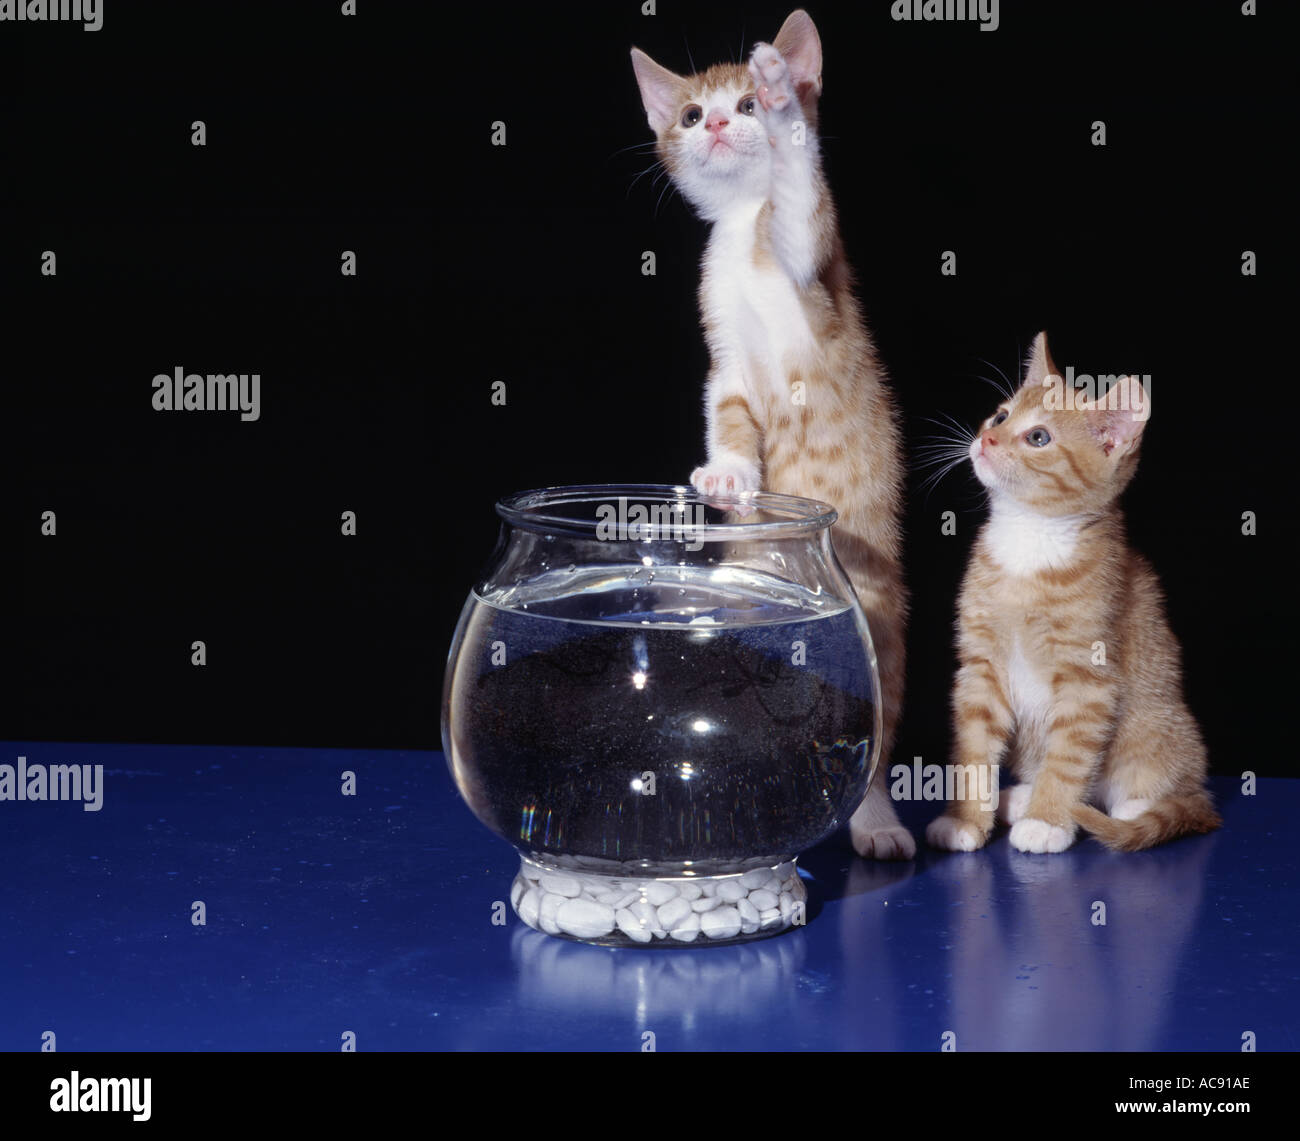 Cats with fishbowl Stock Photo